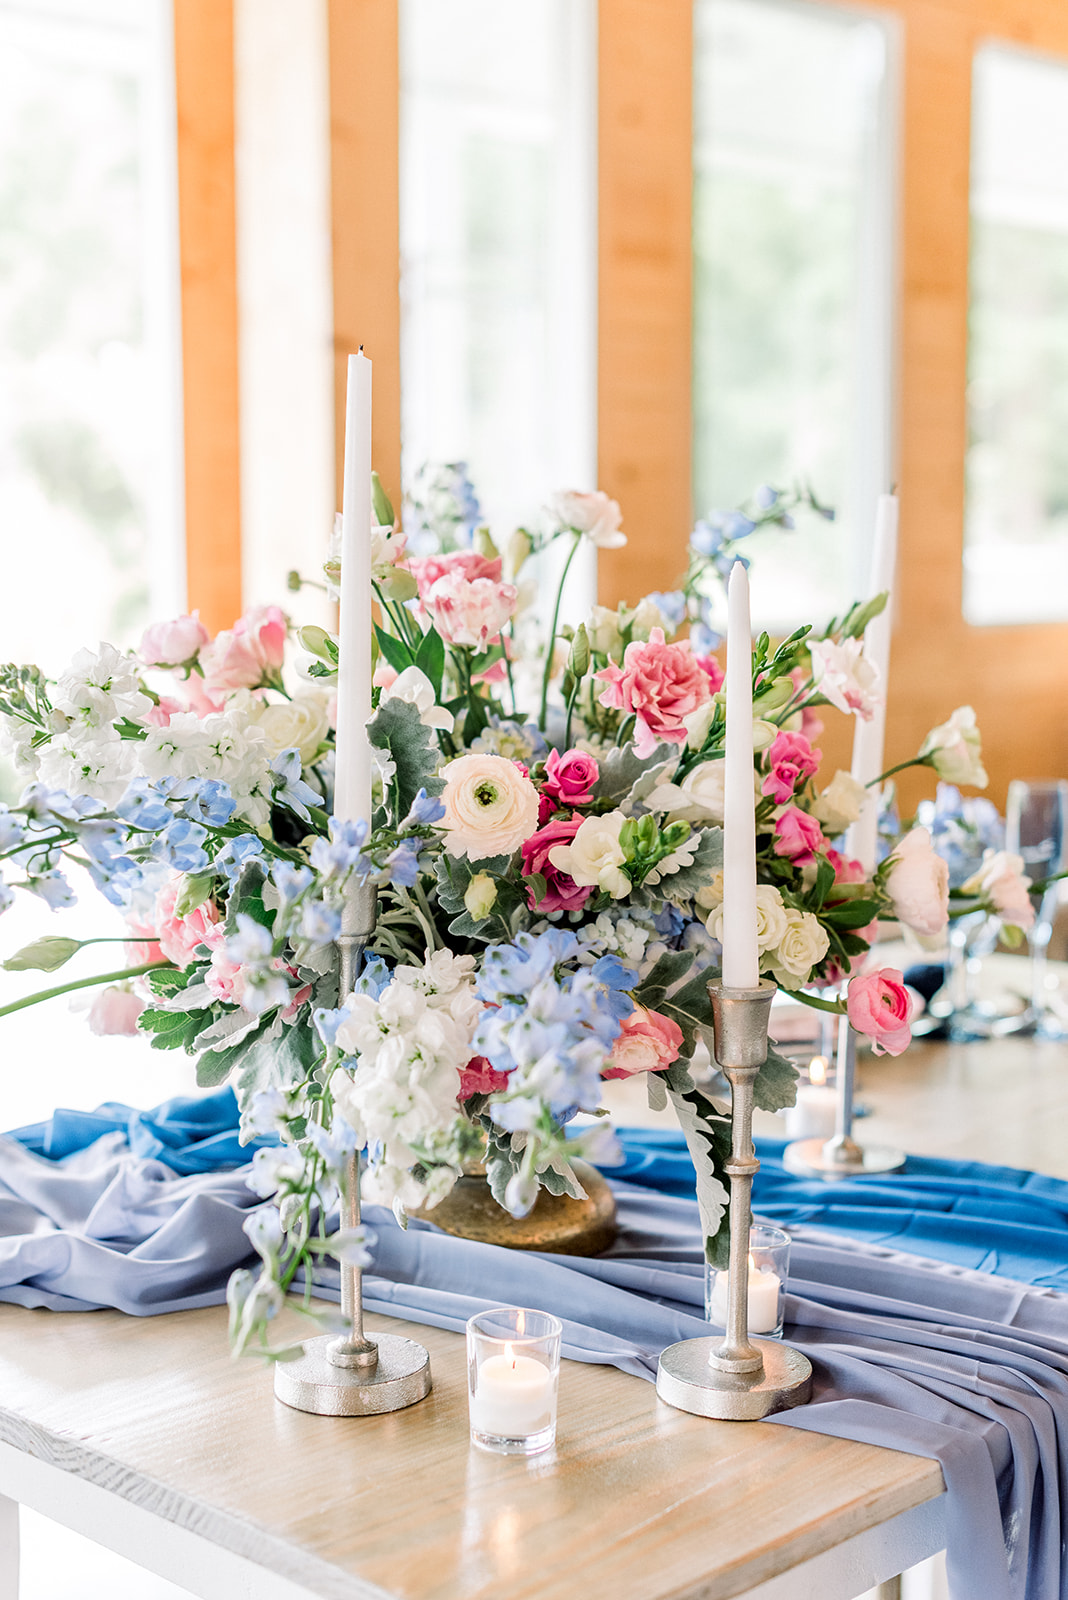 Walnut Hill Open House Blue and white sweetheart tablescape - rentals by Party reflections and floral by Blooms Works Raleigh